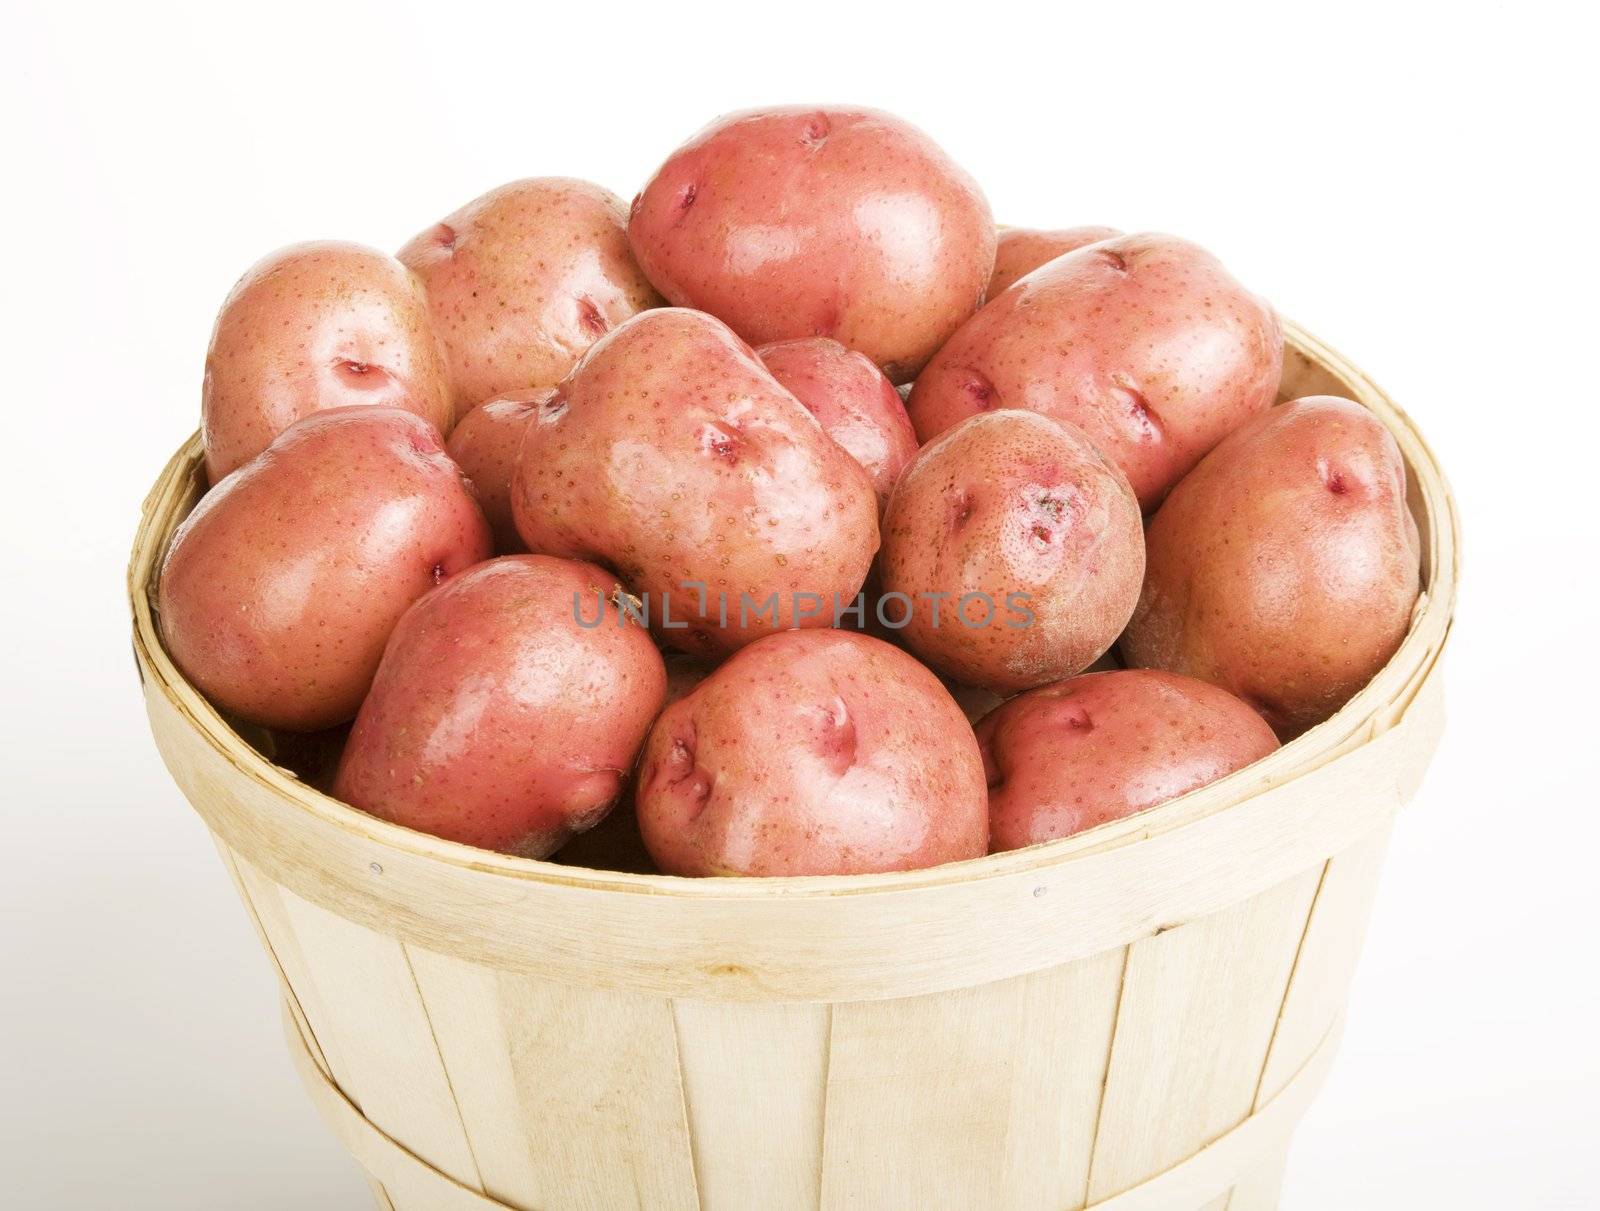 Red Potatoes gathered in a Woven Basket